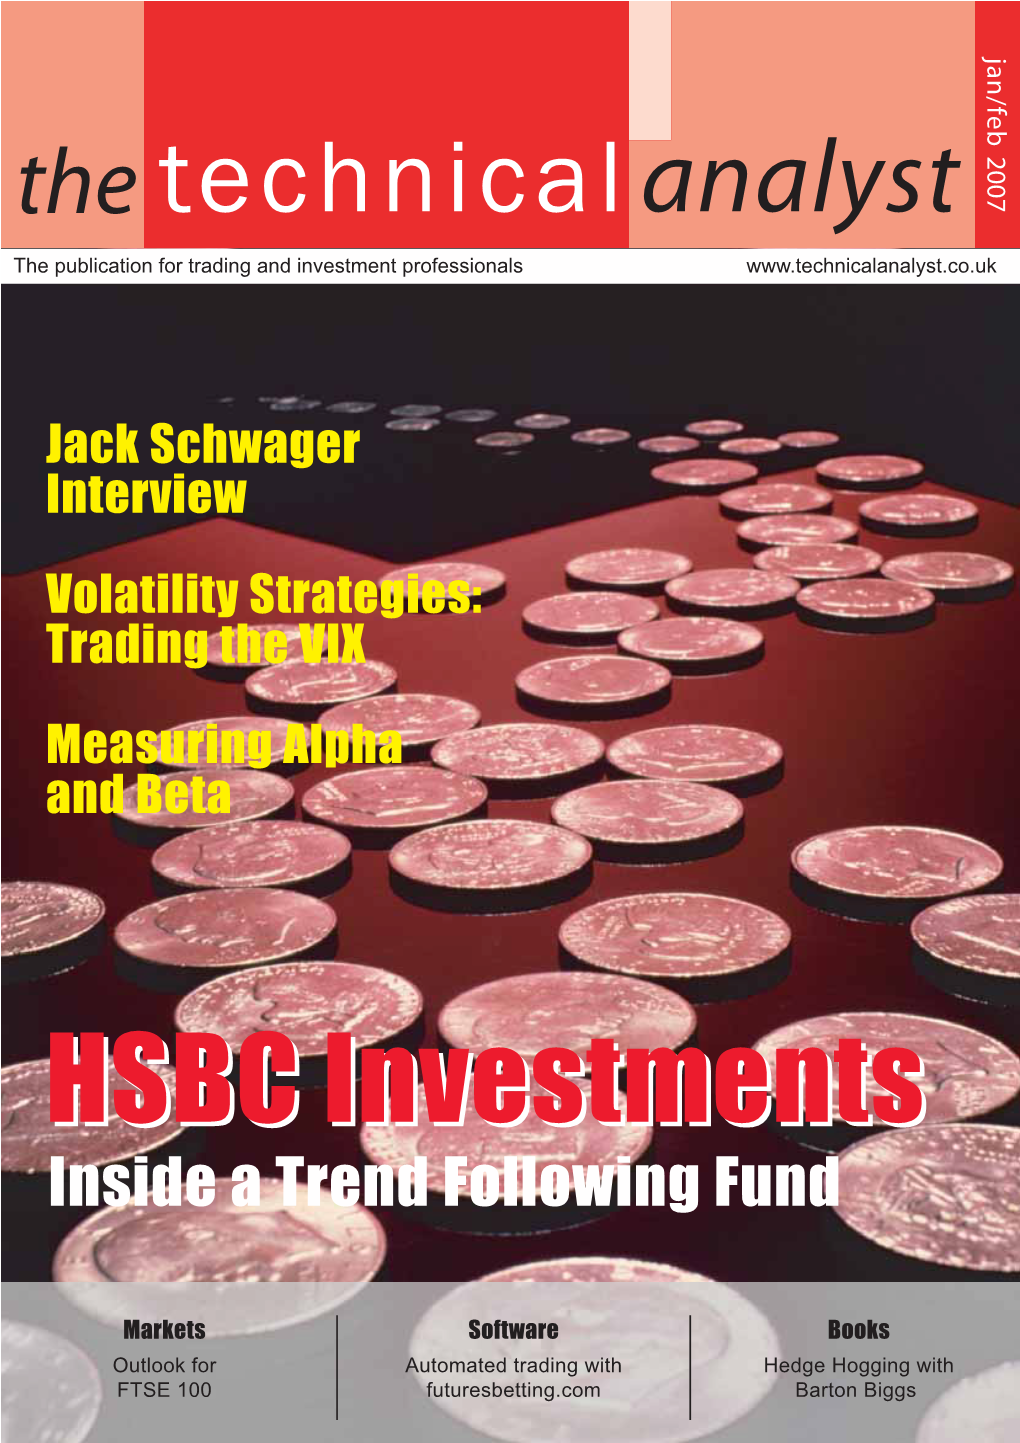 HSBC Investments Inside a Trend Following Fund Inside a Trend Following